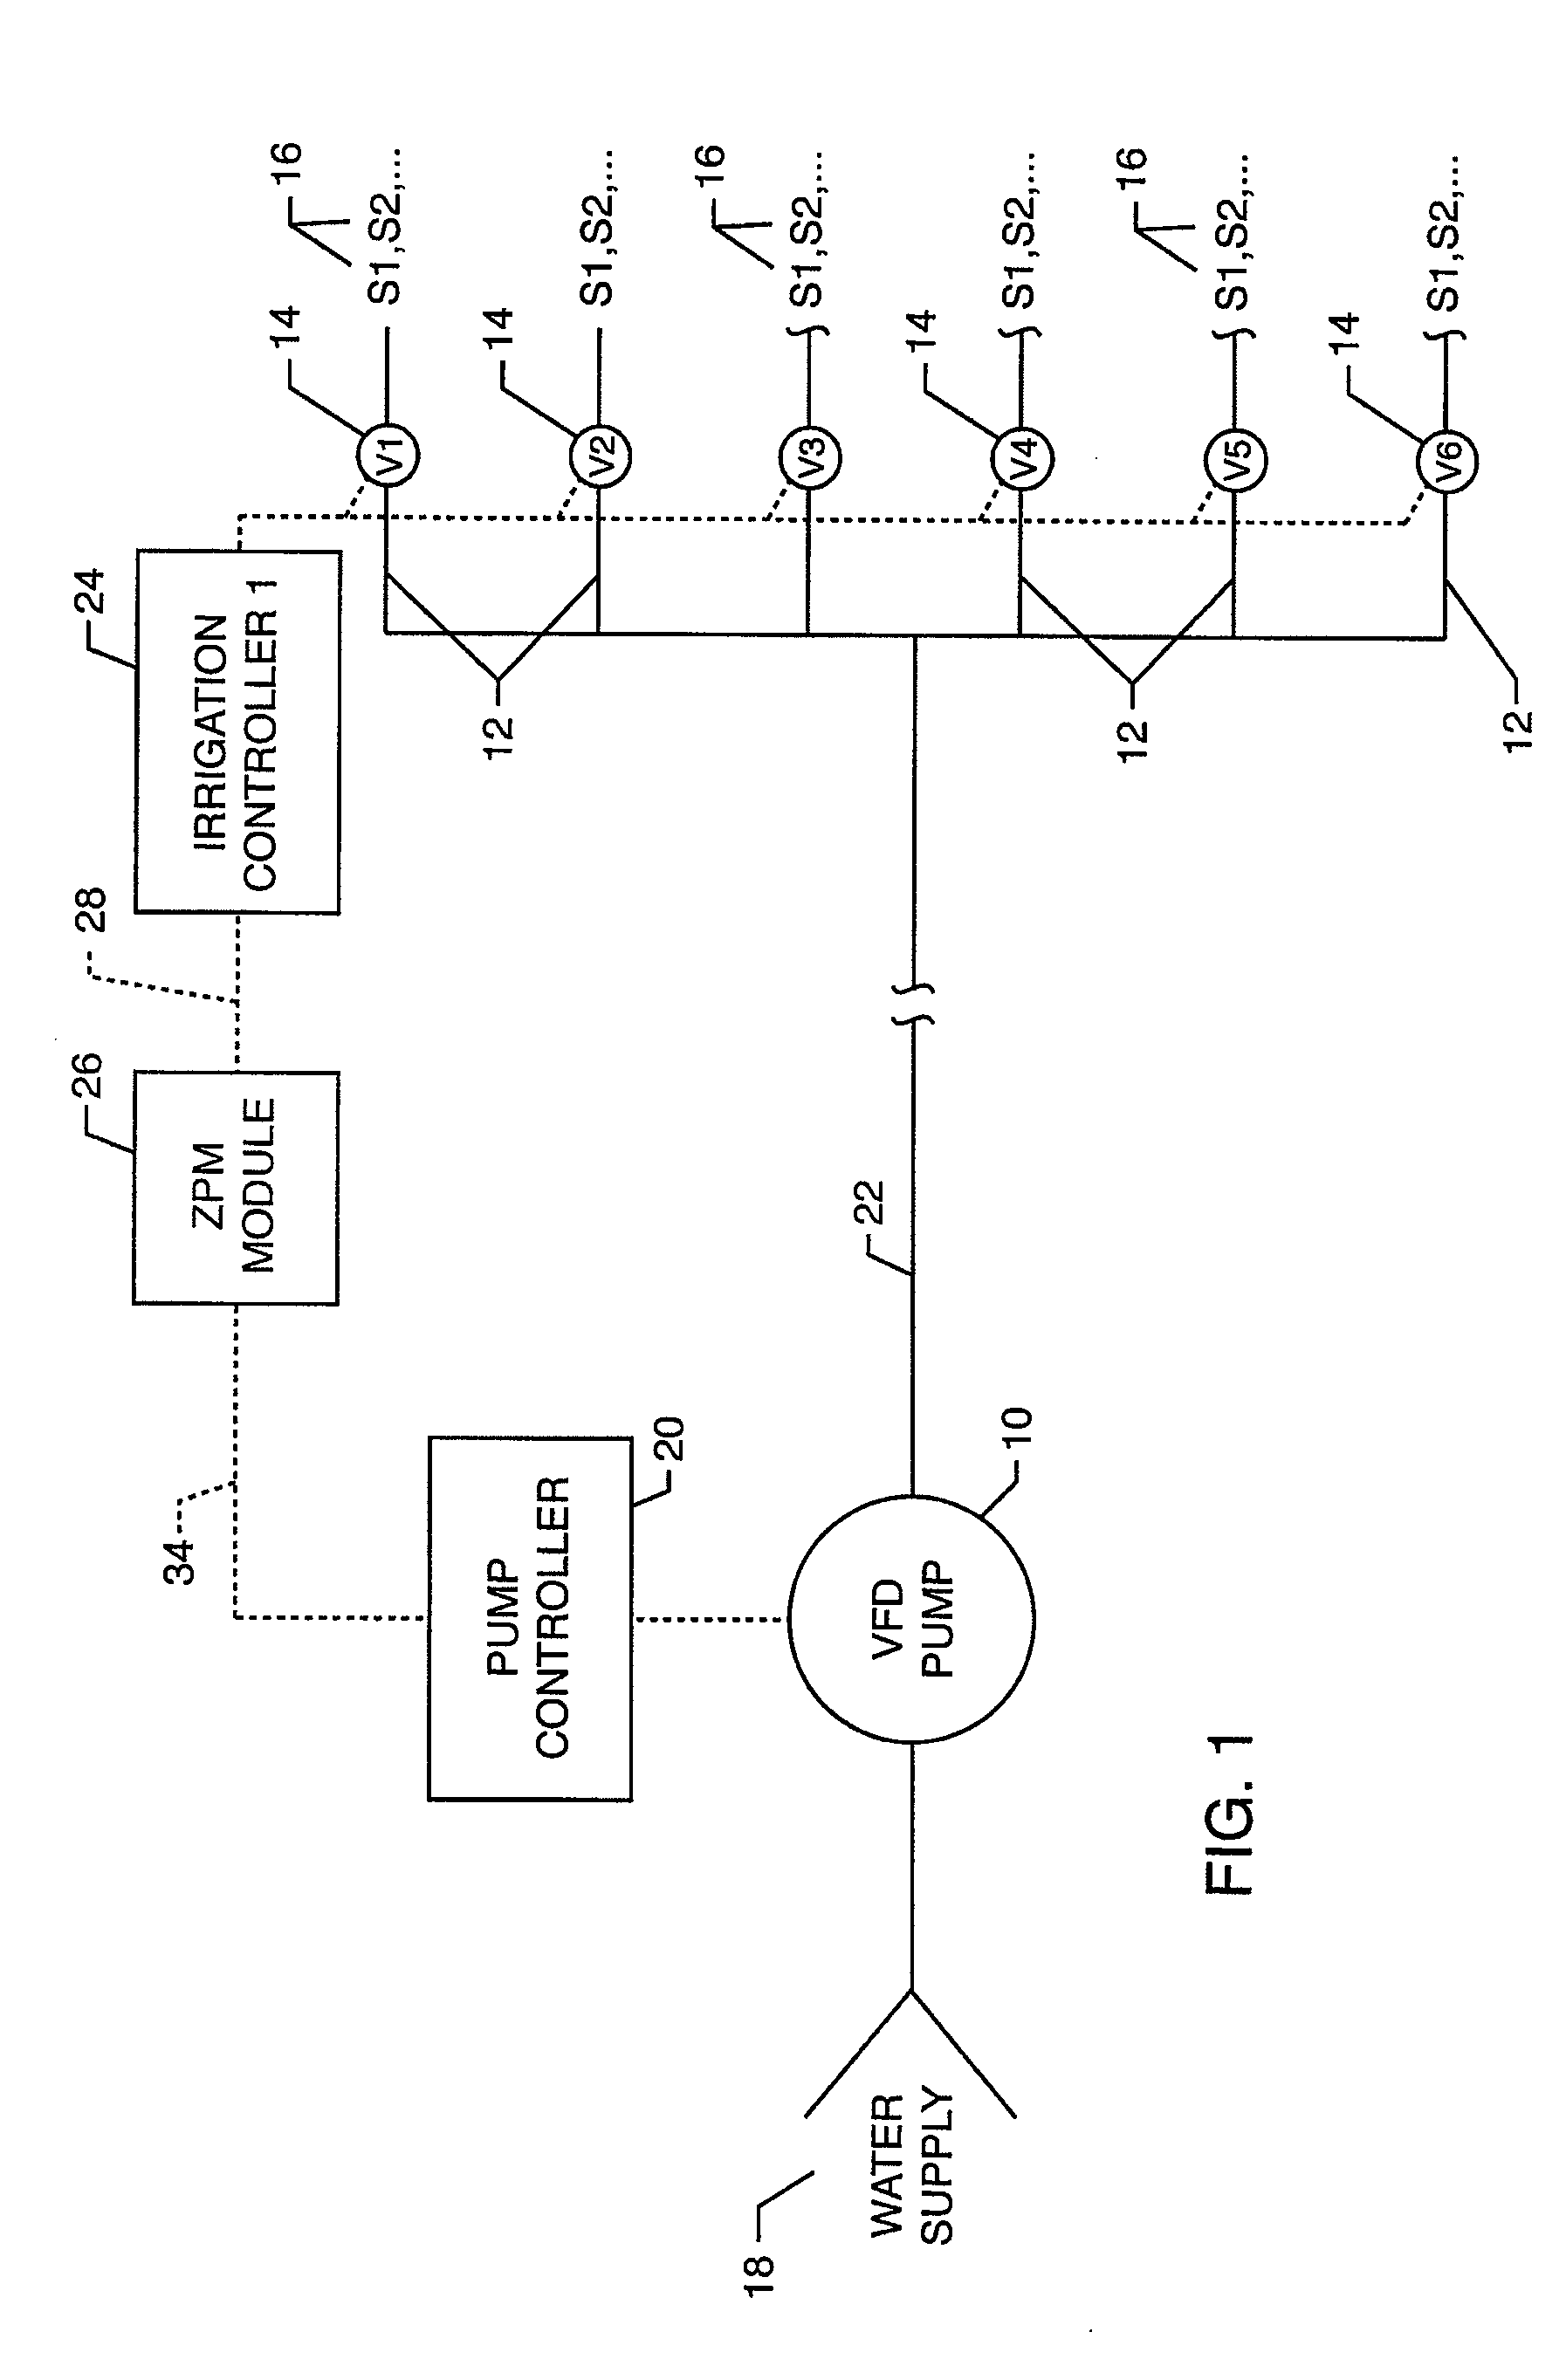 Zone Pressure Management System and Method for an Irrigation System